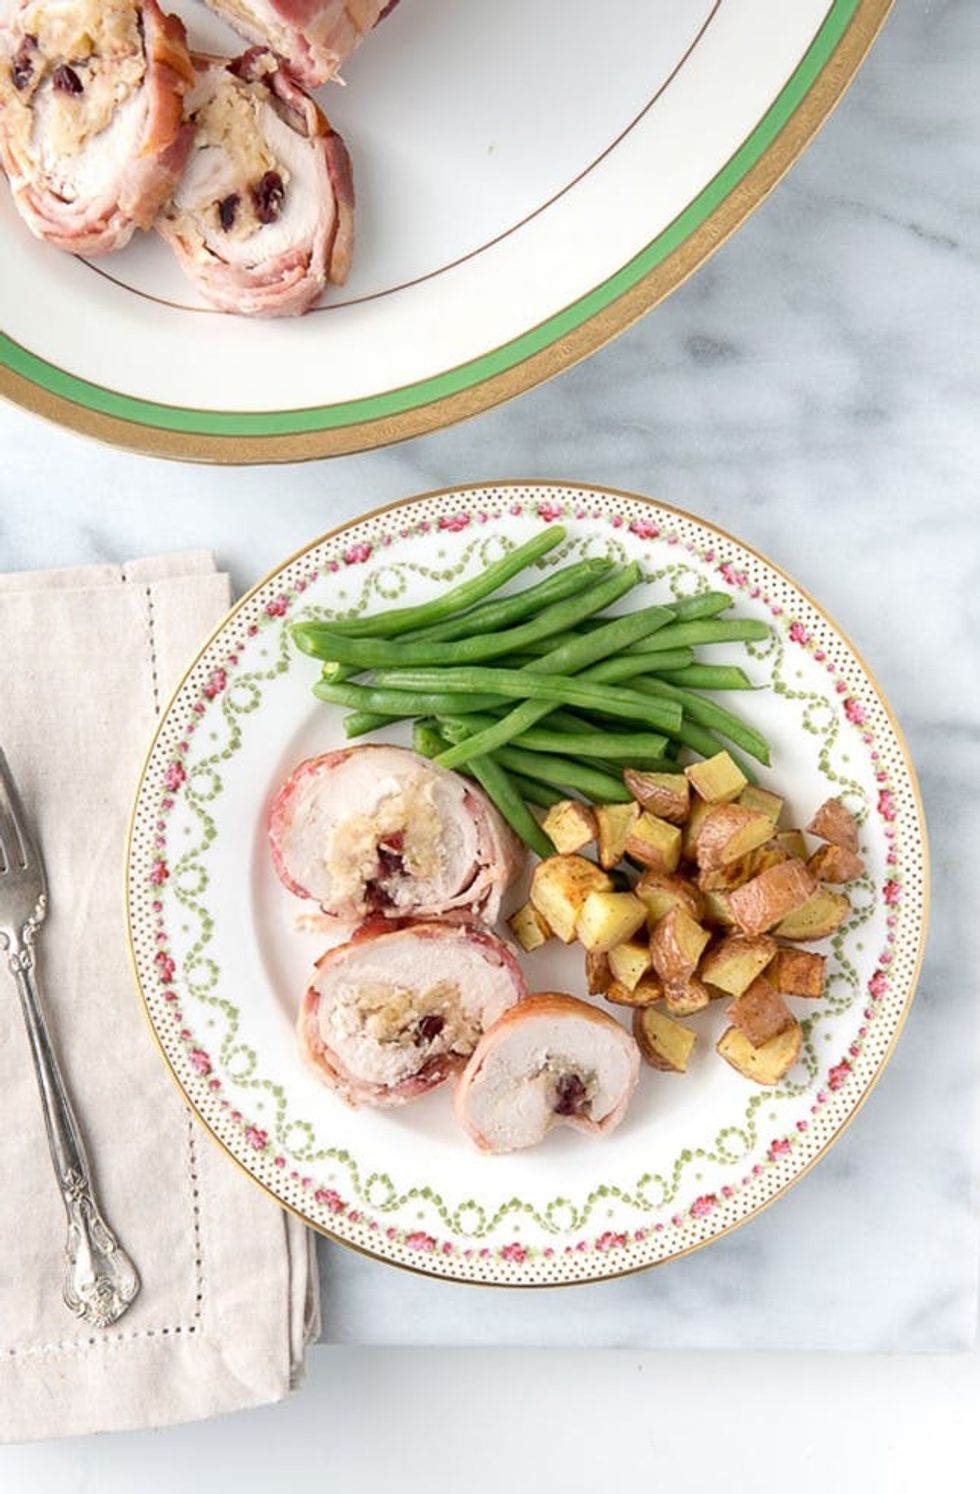 Turkey Roulade With Apple Cranberry Stuffing in a Bacon Weave